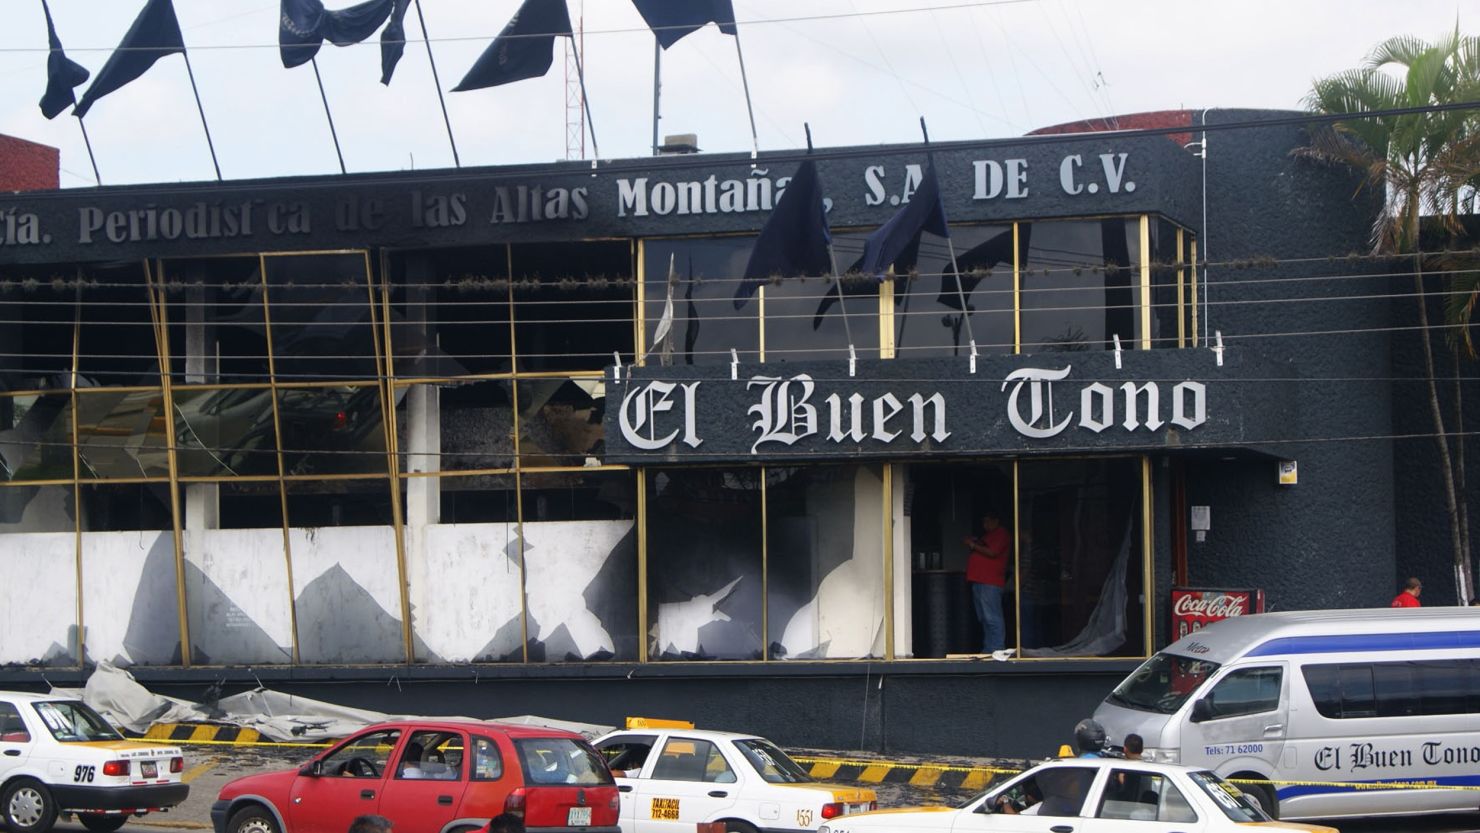 El Norte newspaper is the latest newspaper under attack in Mexico. Previously the El Buen Tono newspaper (pictured here) suffered from arsonists. Journalists have come under frequent attack in Mexico since the country declared open war on drug cartels.